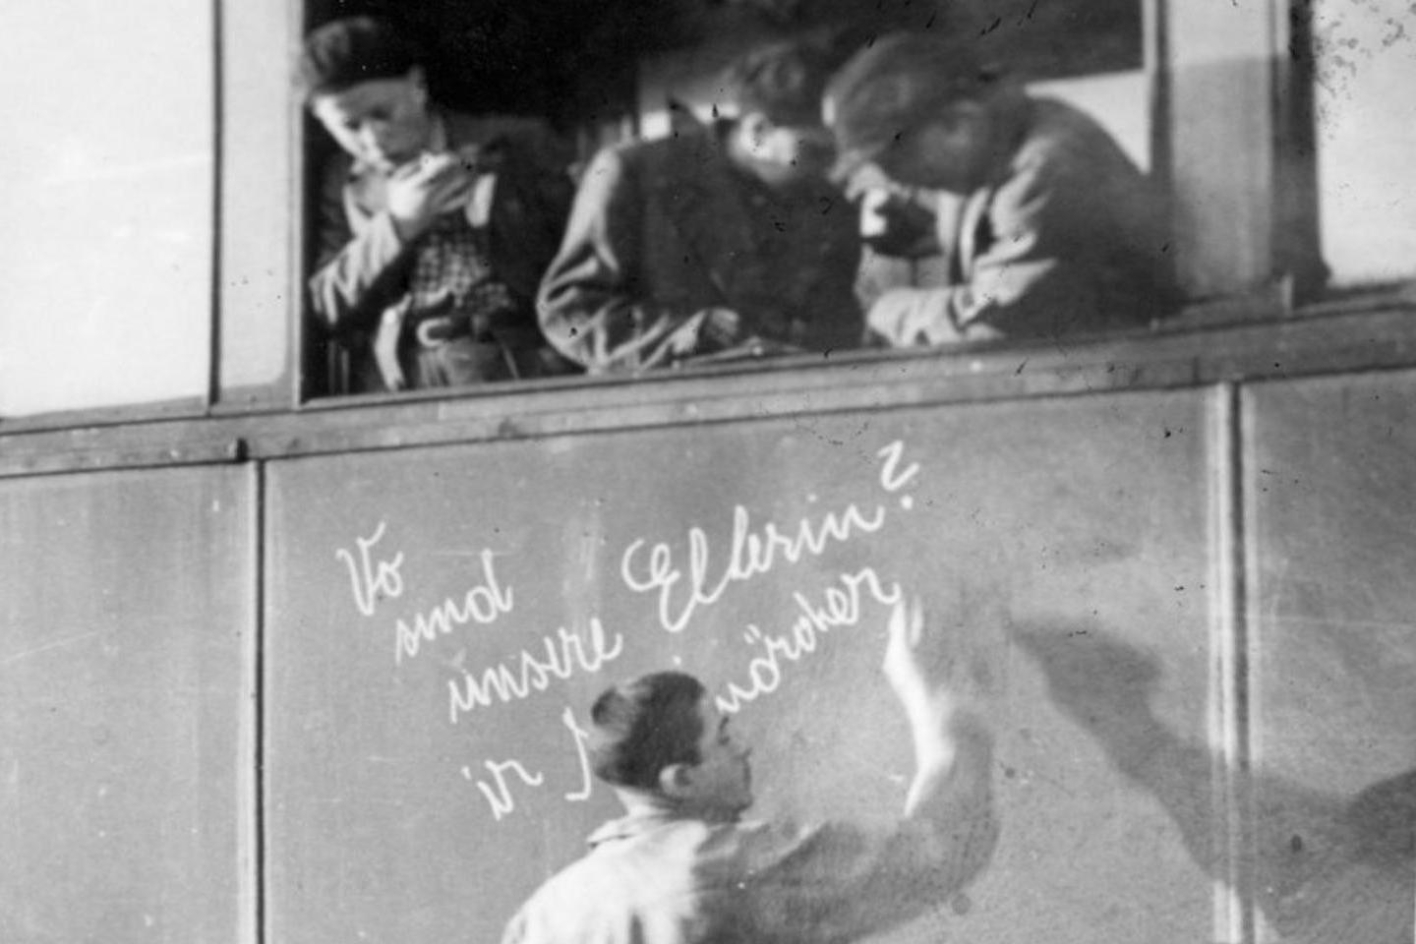 Liberated children and juvenile prisoners of Buchenwald concentration camp at Weimar Central Station in the carriage of a train to Ecoui. Josek Dziubak writes the inscription "Where are our parents? You murderers".